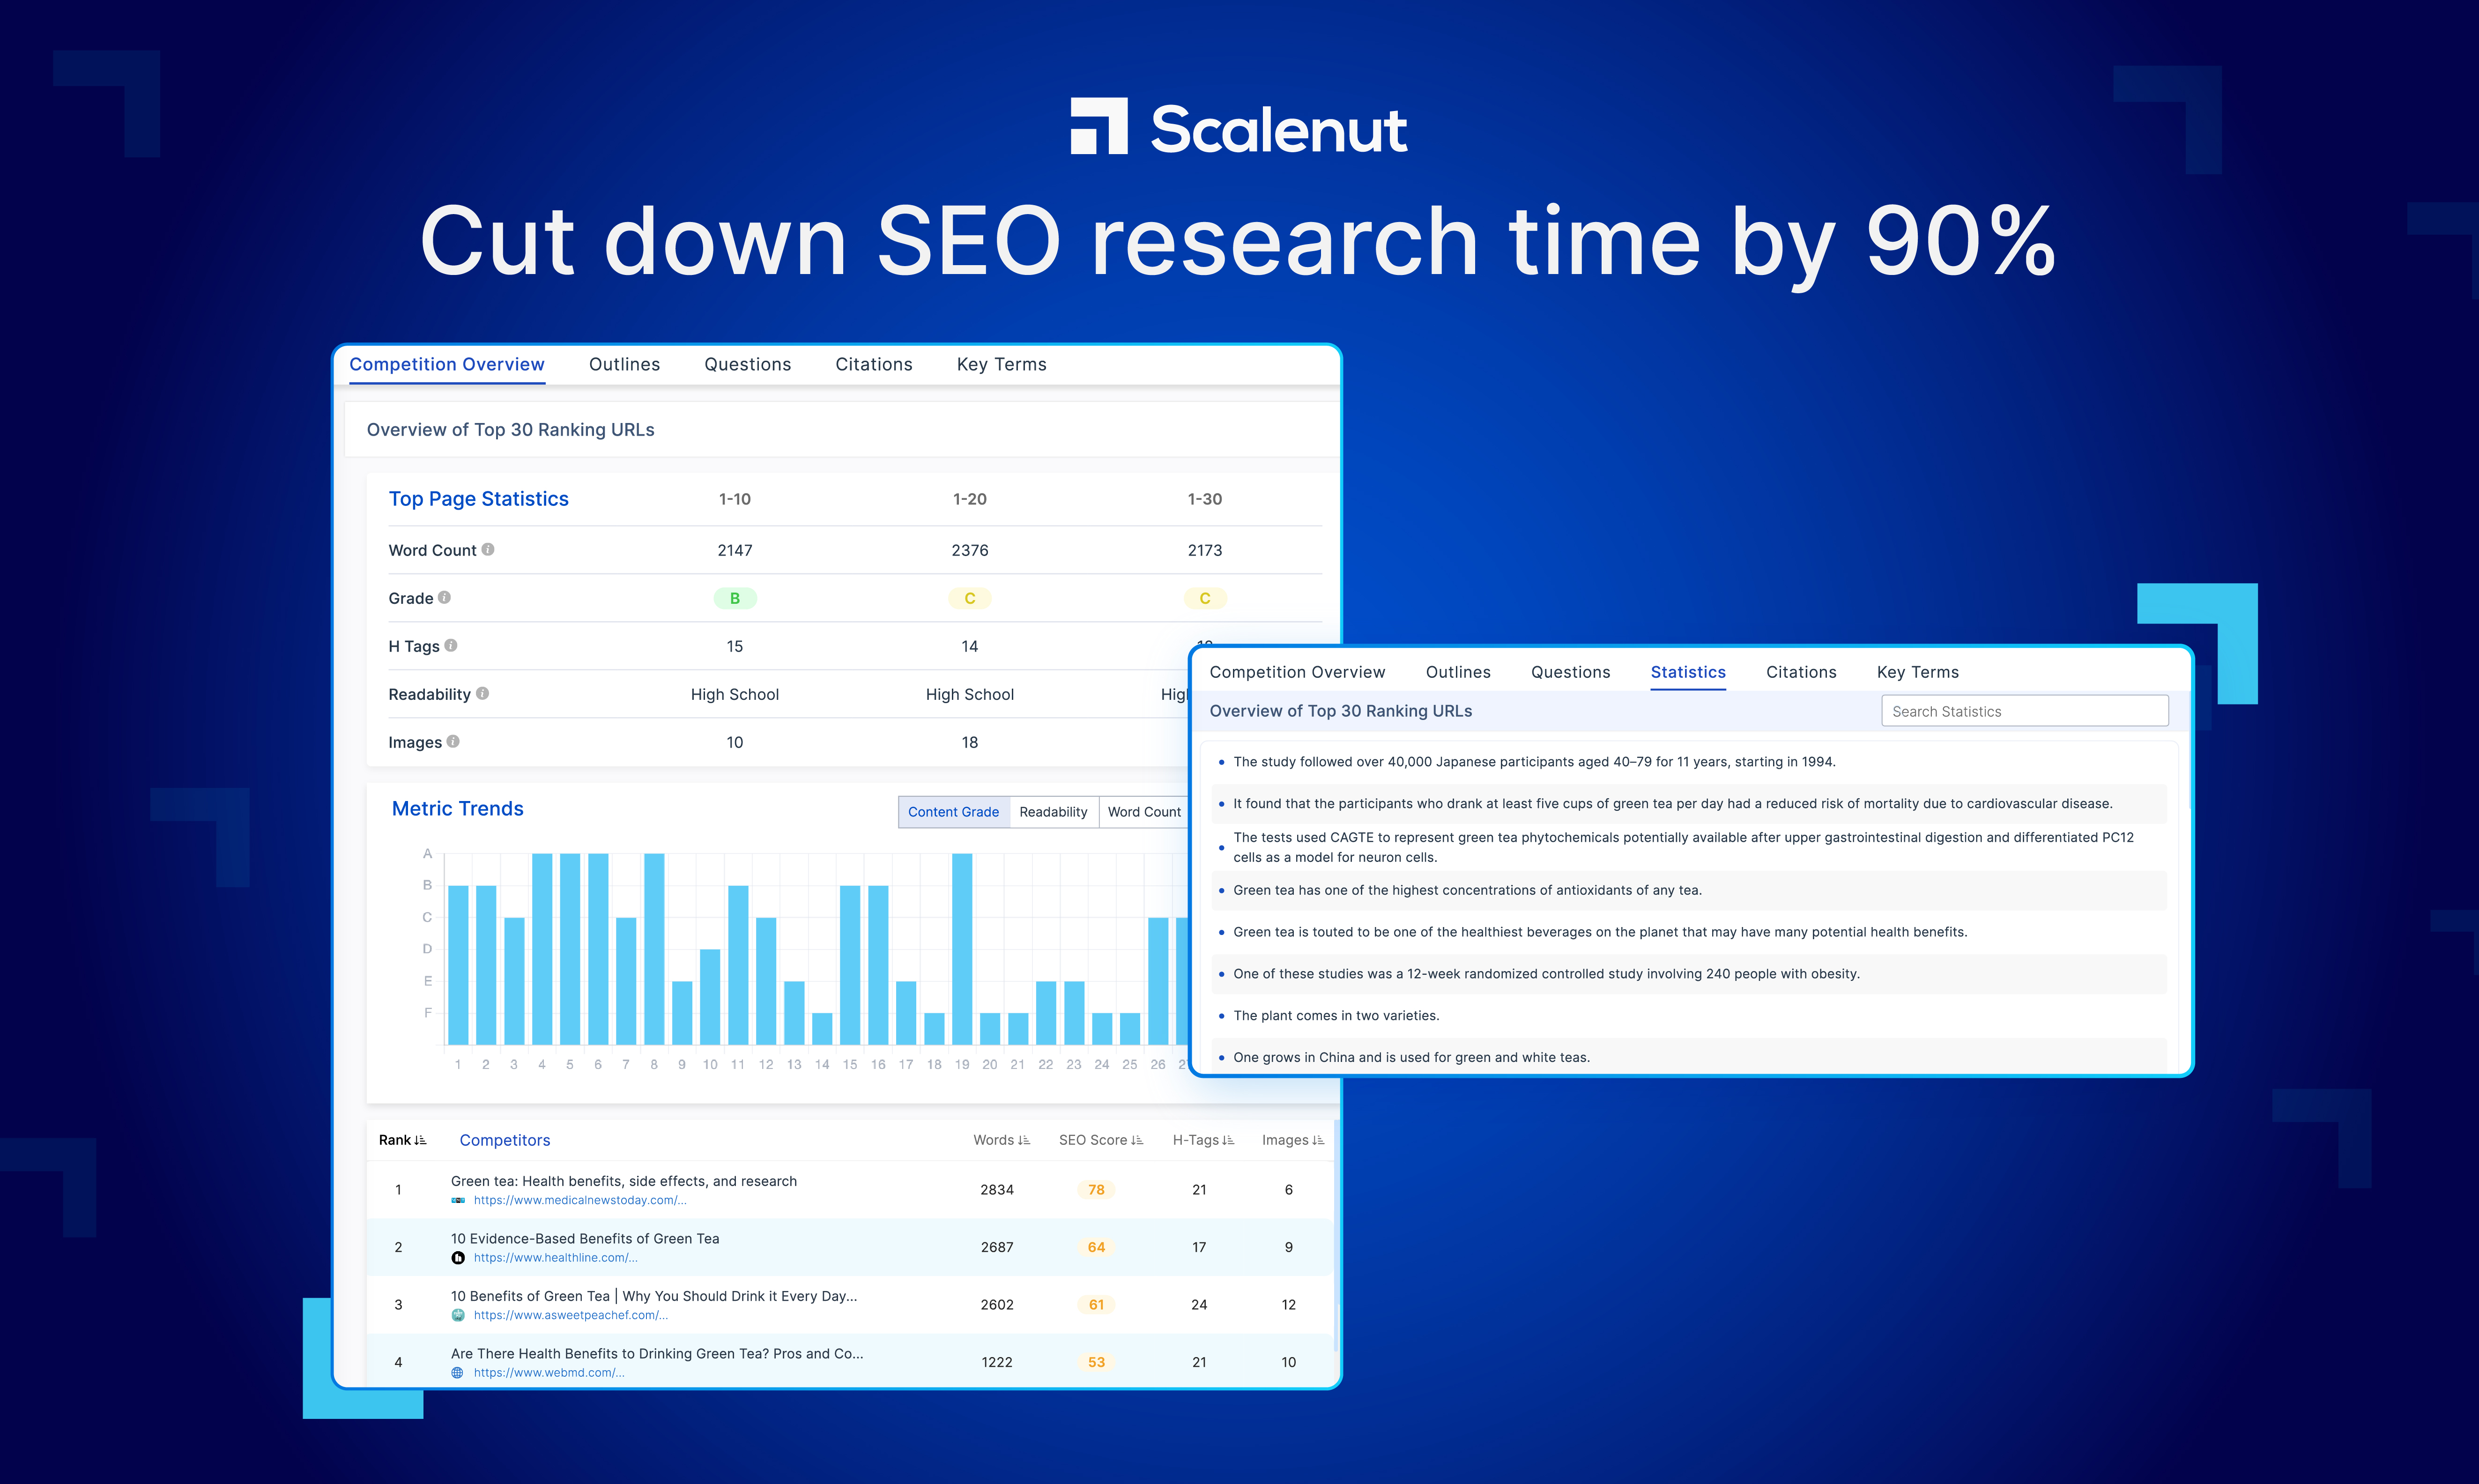 Cut down SEO research time by 90%